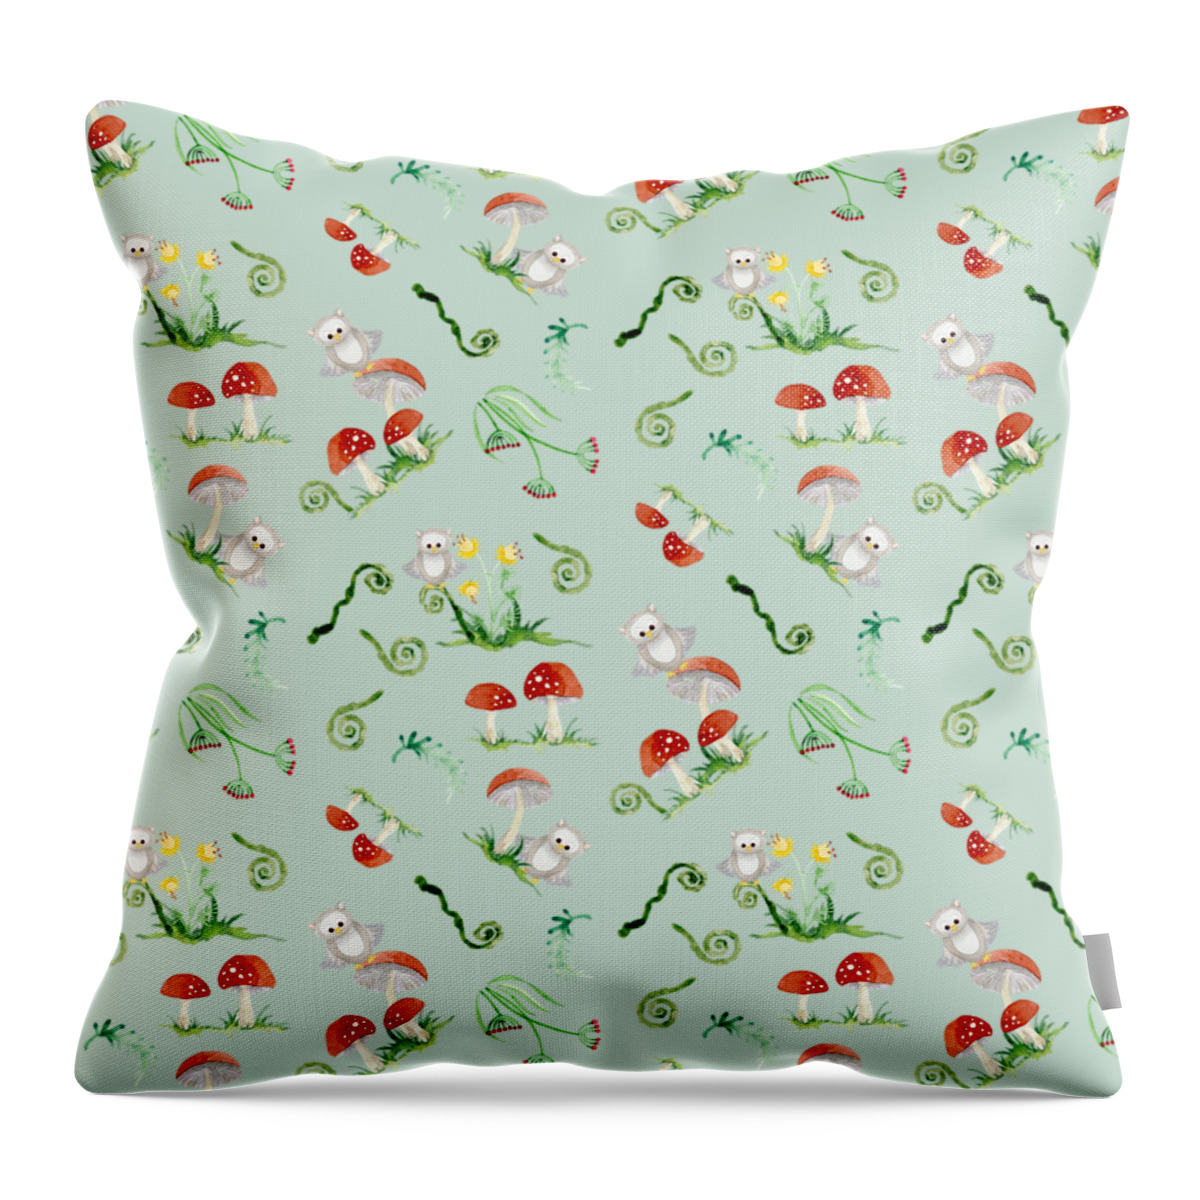 Red Mushrooms Throw Pillow featuring the painting Woodland Fairy Tale - Red Mushrooms n Owls by Audrey Jeanne Roberts